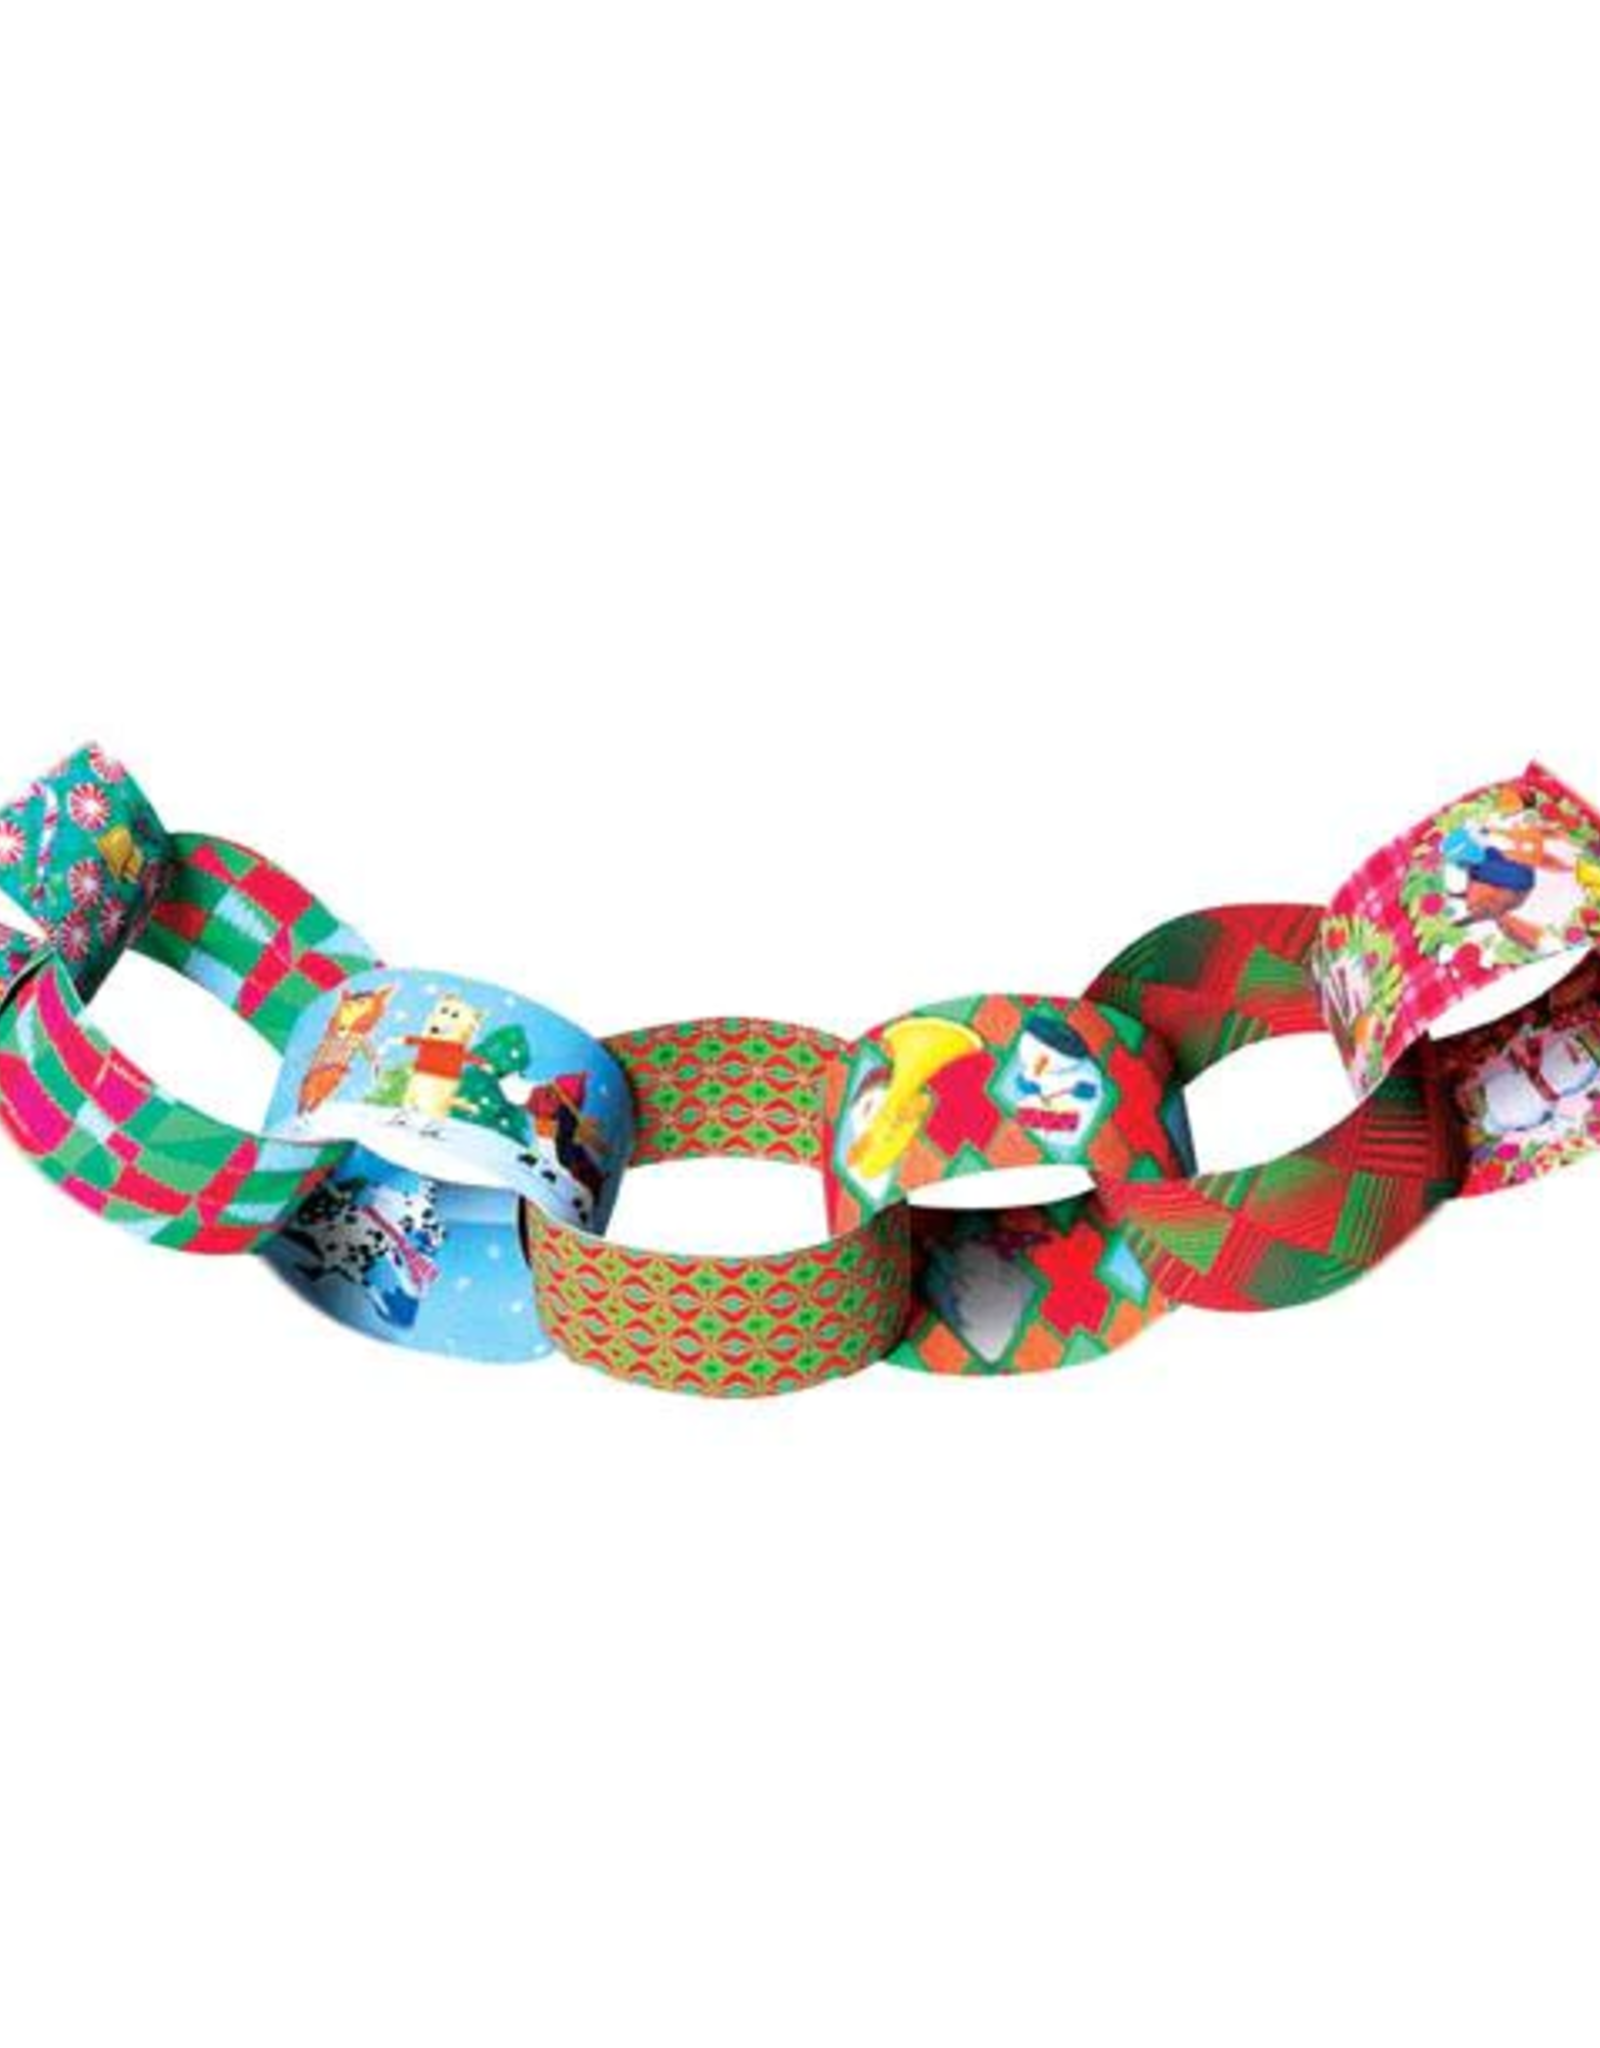 Eeboo Holiday Paper Chains